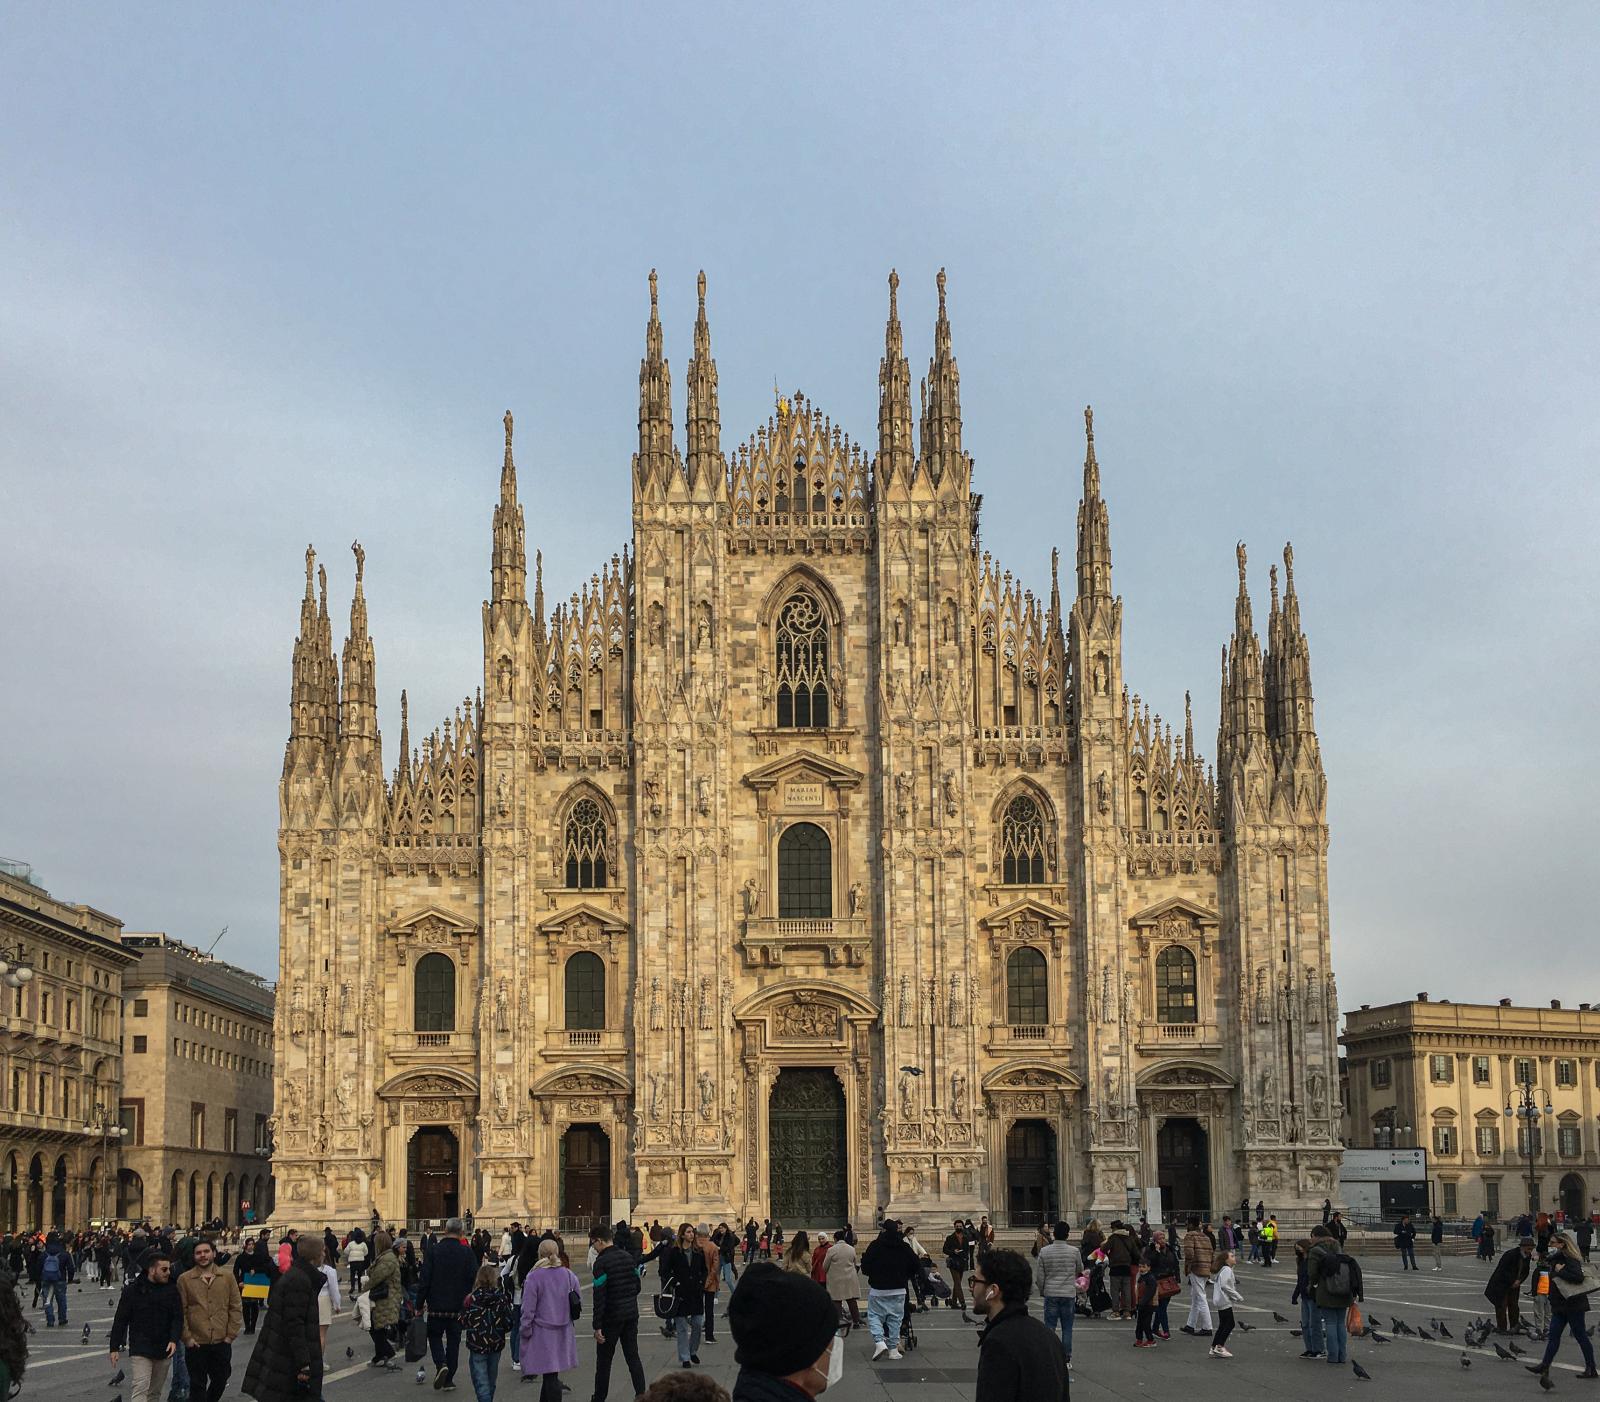 An Evening With Il Duomo